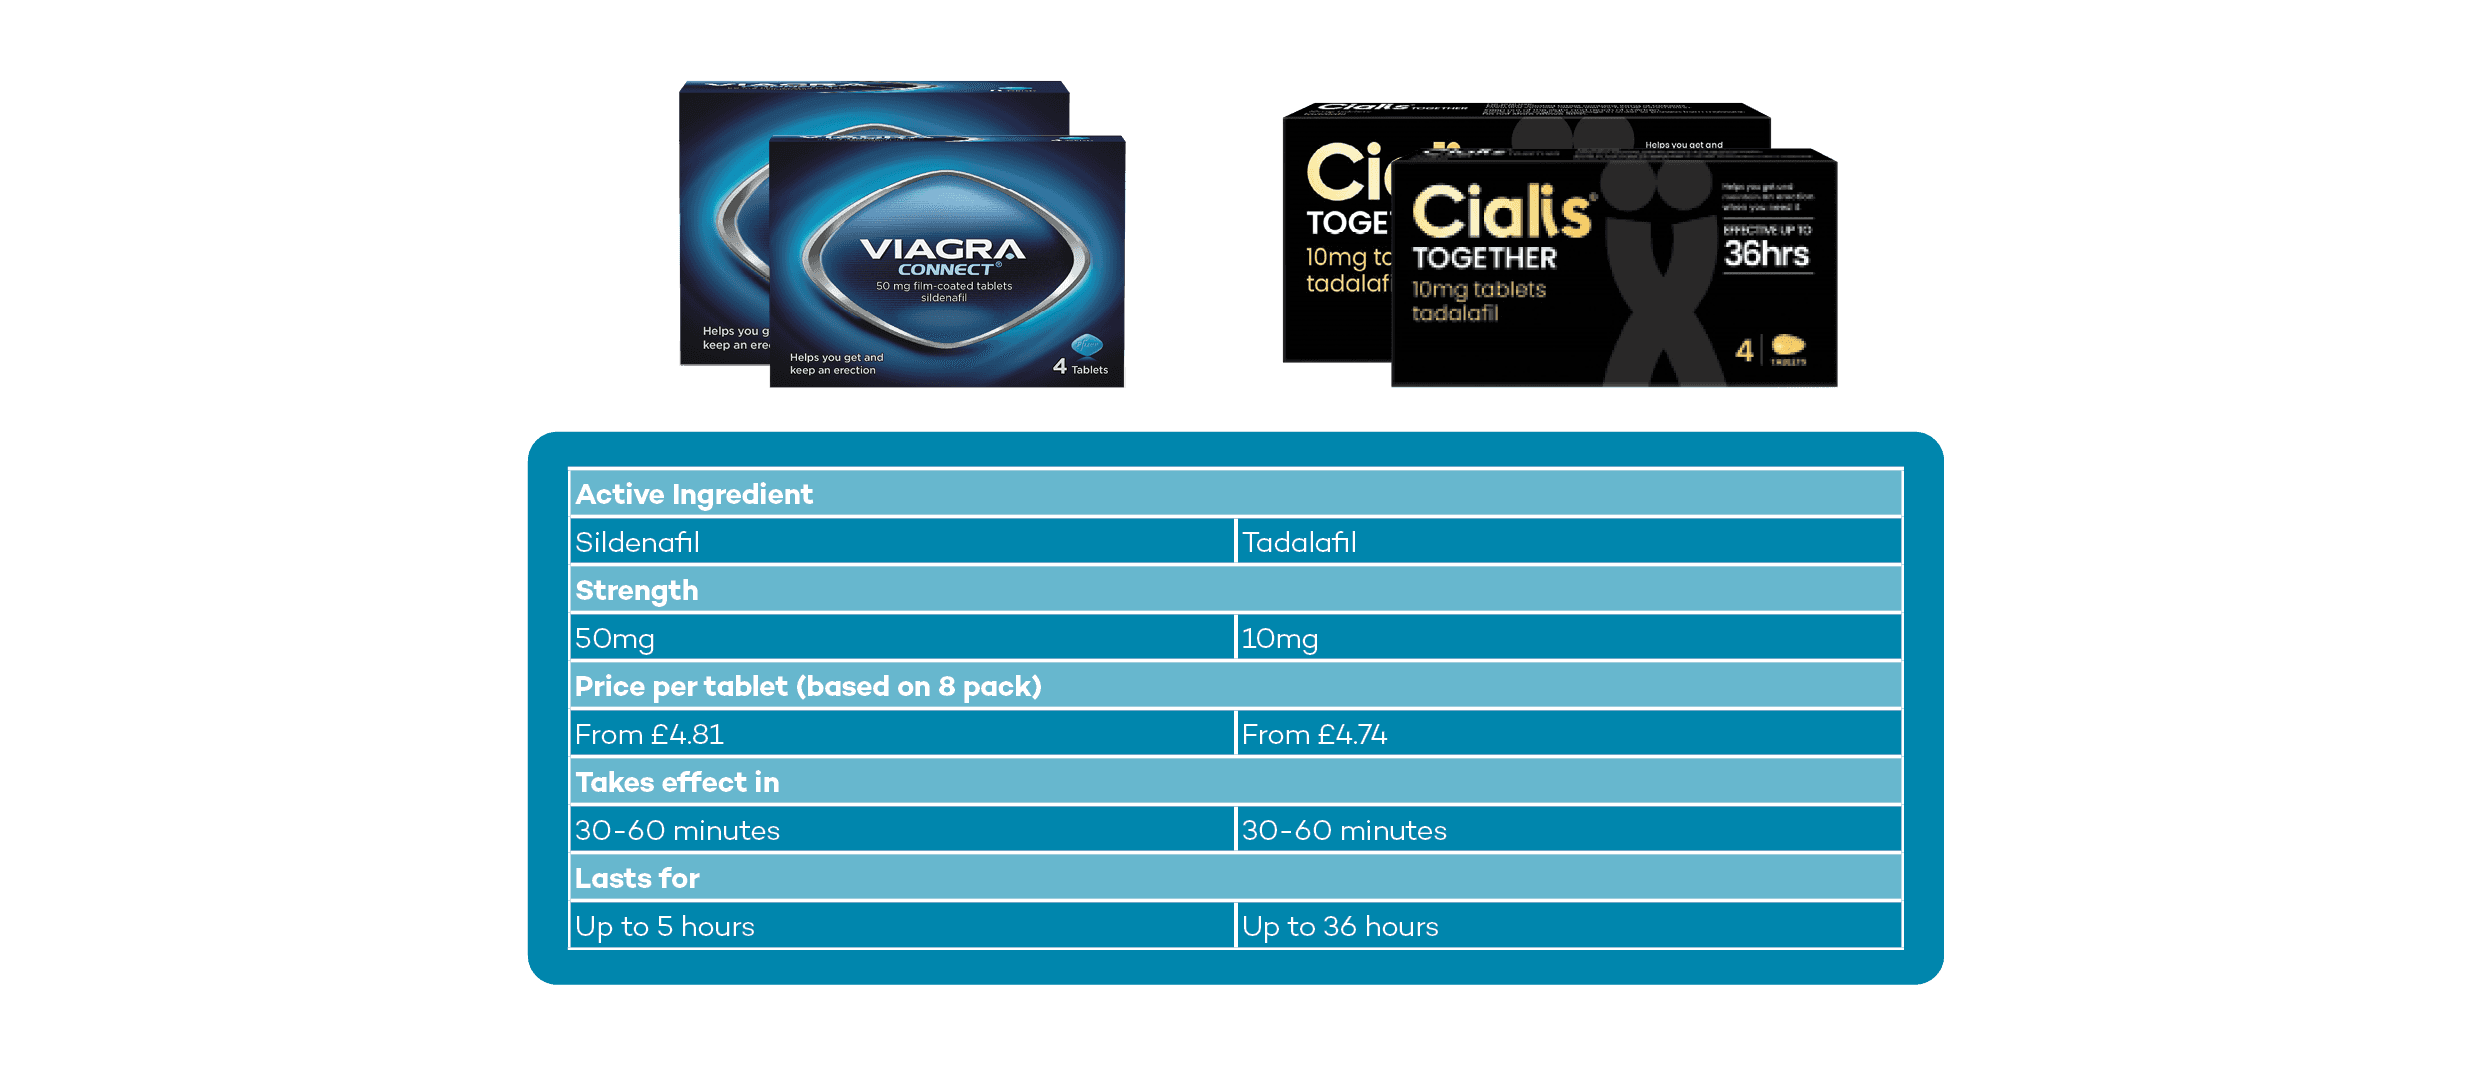 viagra vs cialis points of difference table